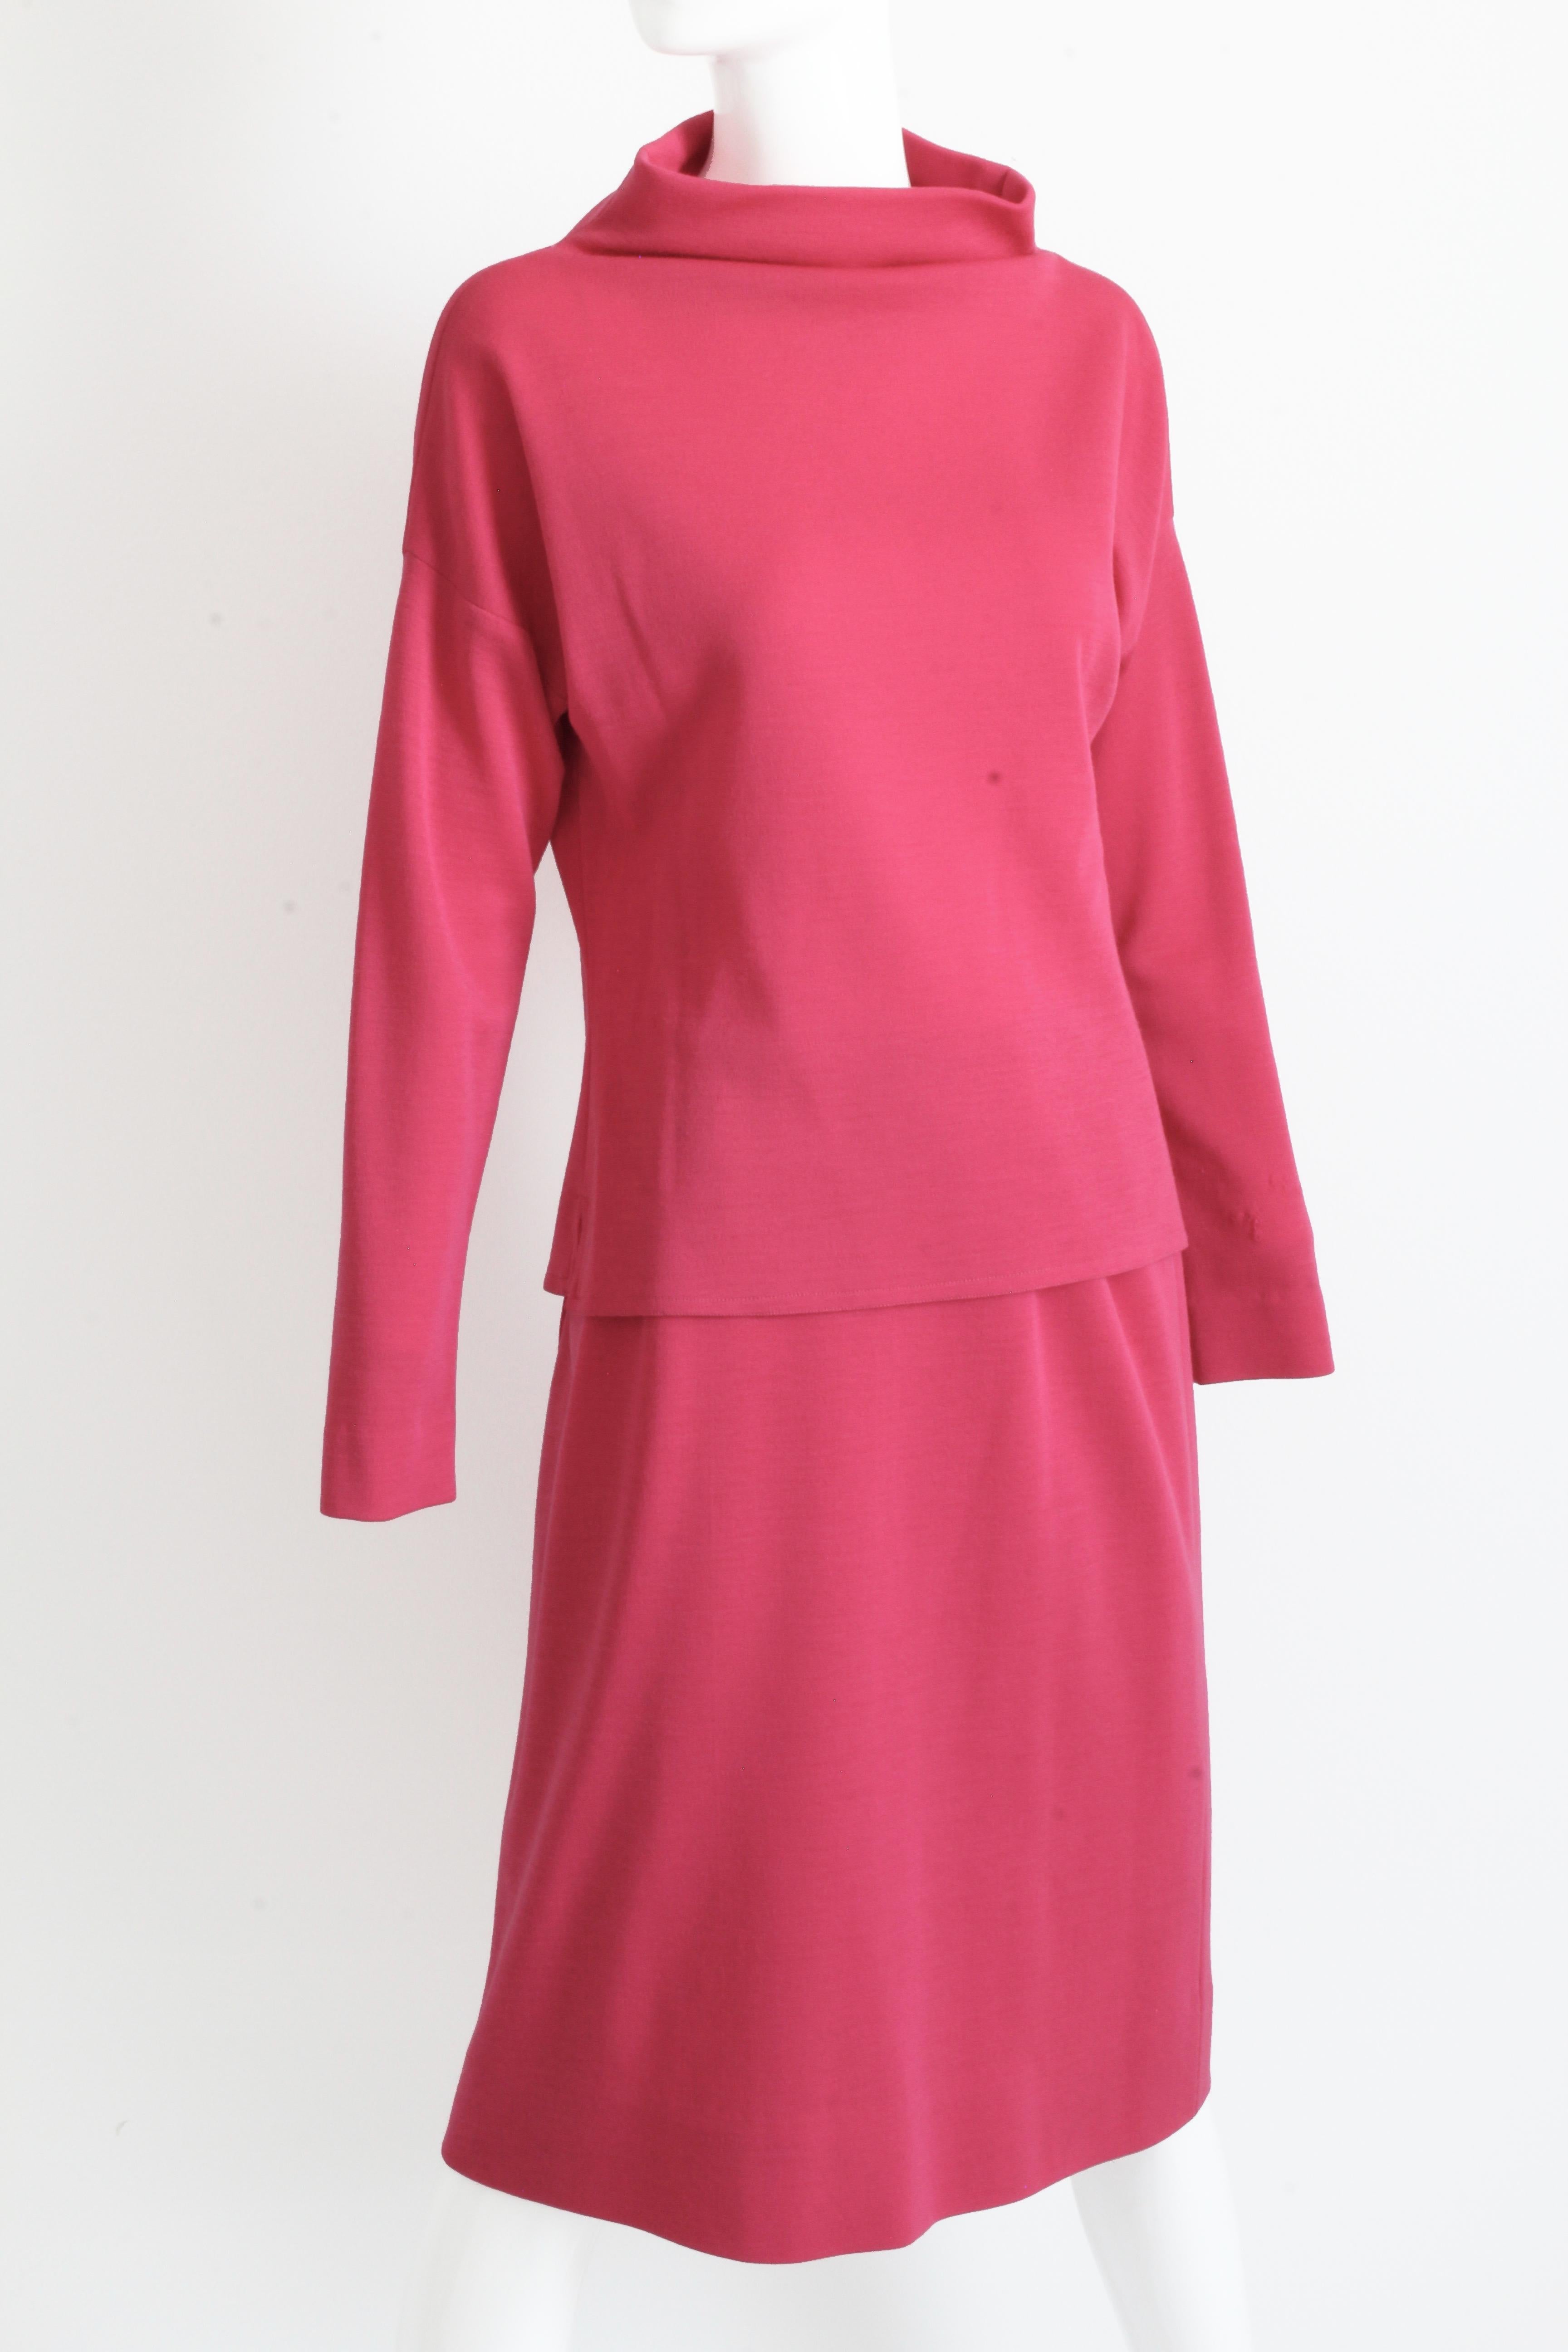 This pink 2pc suit was made by Bonnie Cashin for Sills, likely in the early 1960s.  Made from pink jersey knit, it comes with a raglan sleeve top and lined pencil skirt.  The color is vibrant and so unique - the perfect way to brighten up even the